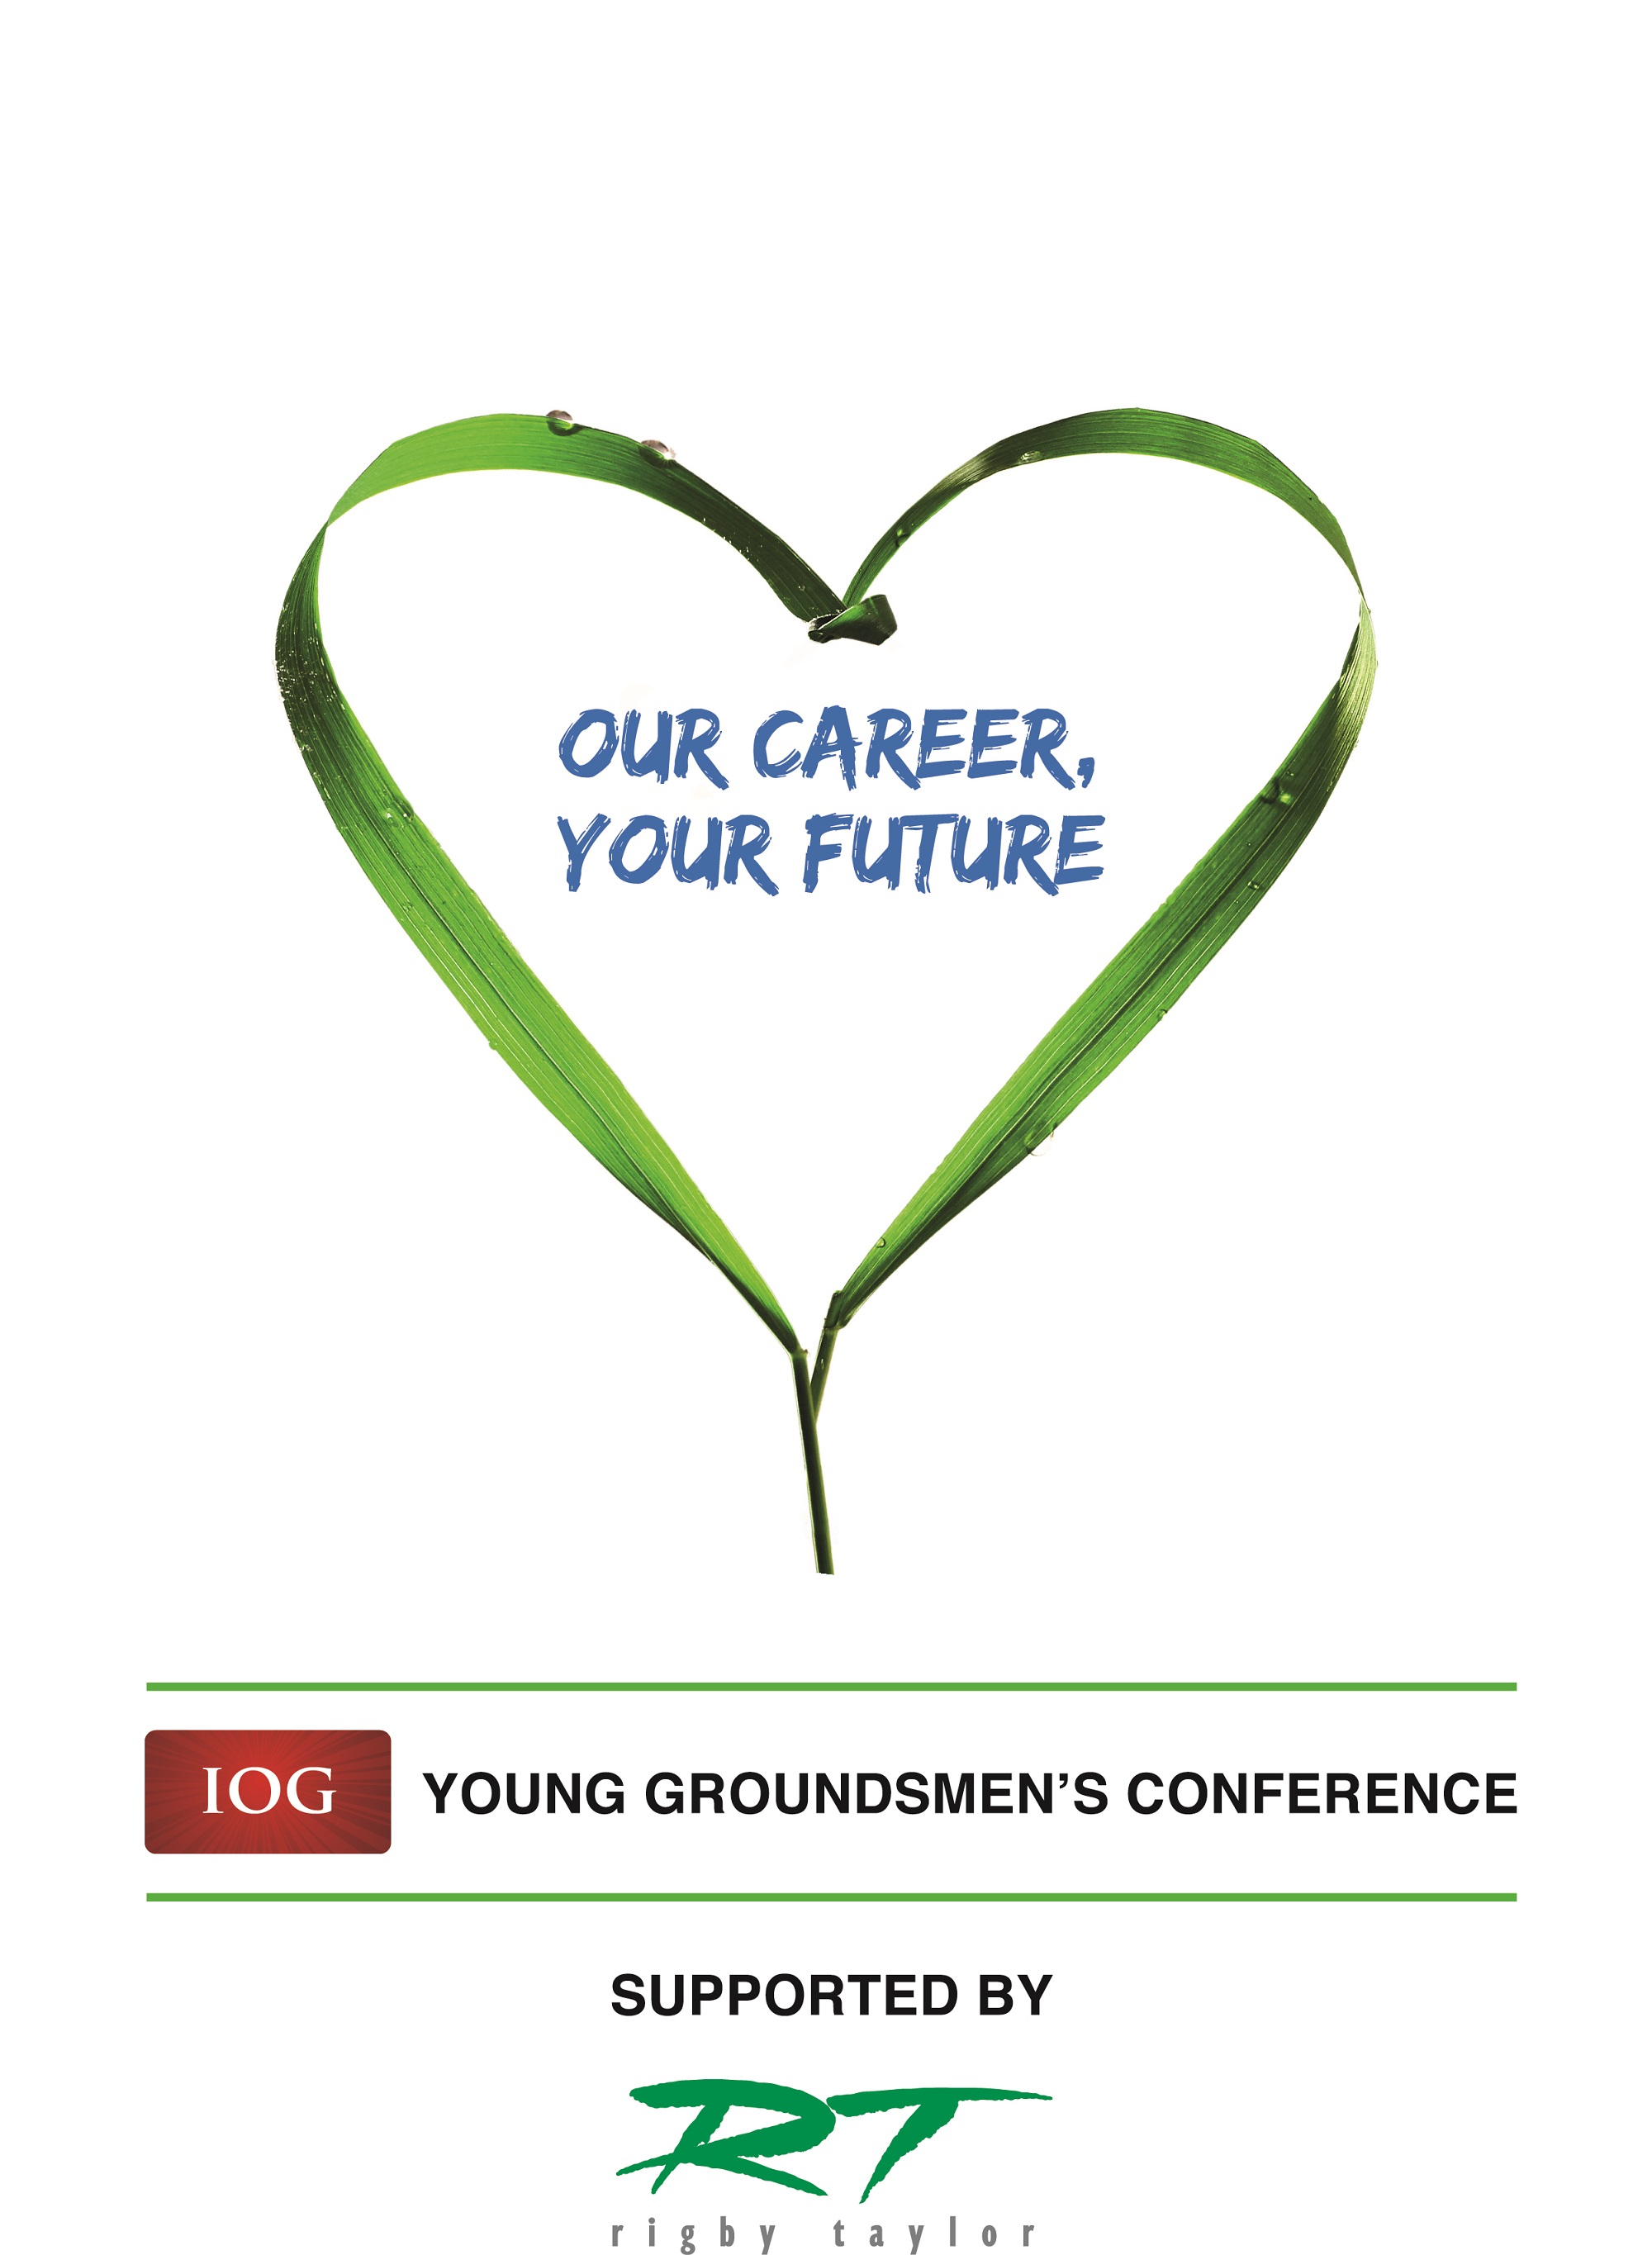 Young Groundsmen’s Conference to Encourage Youngsters into Industry